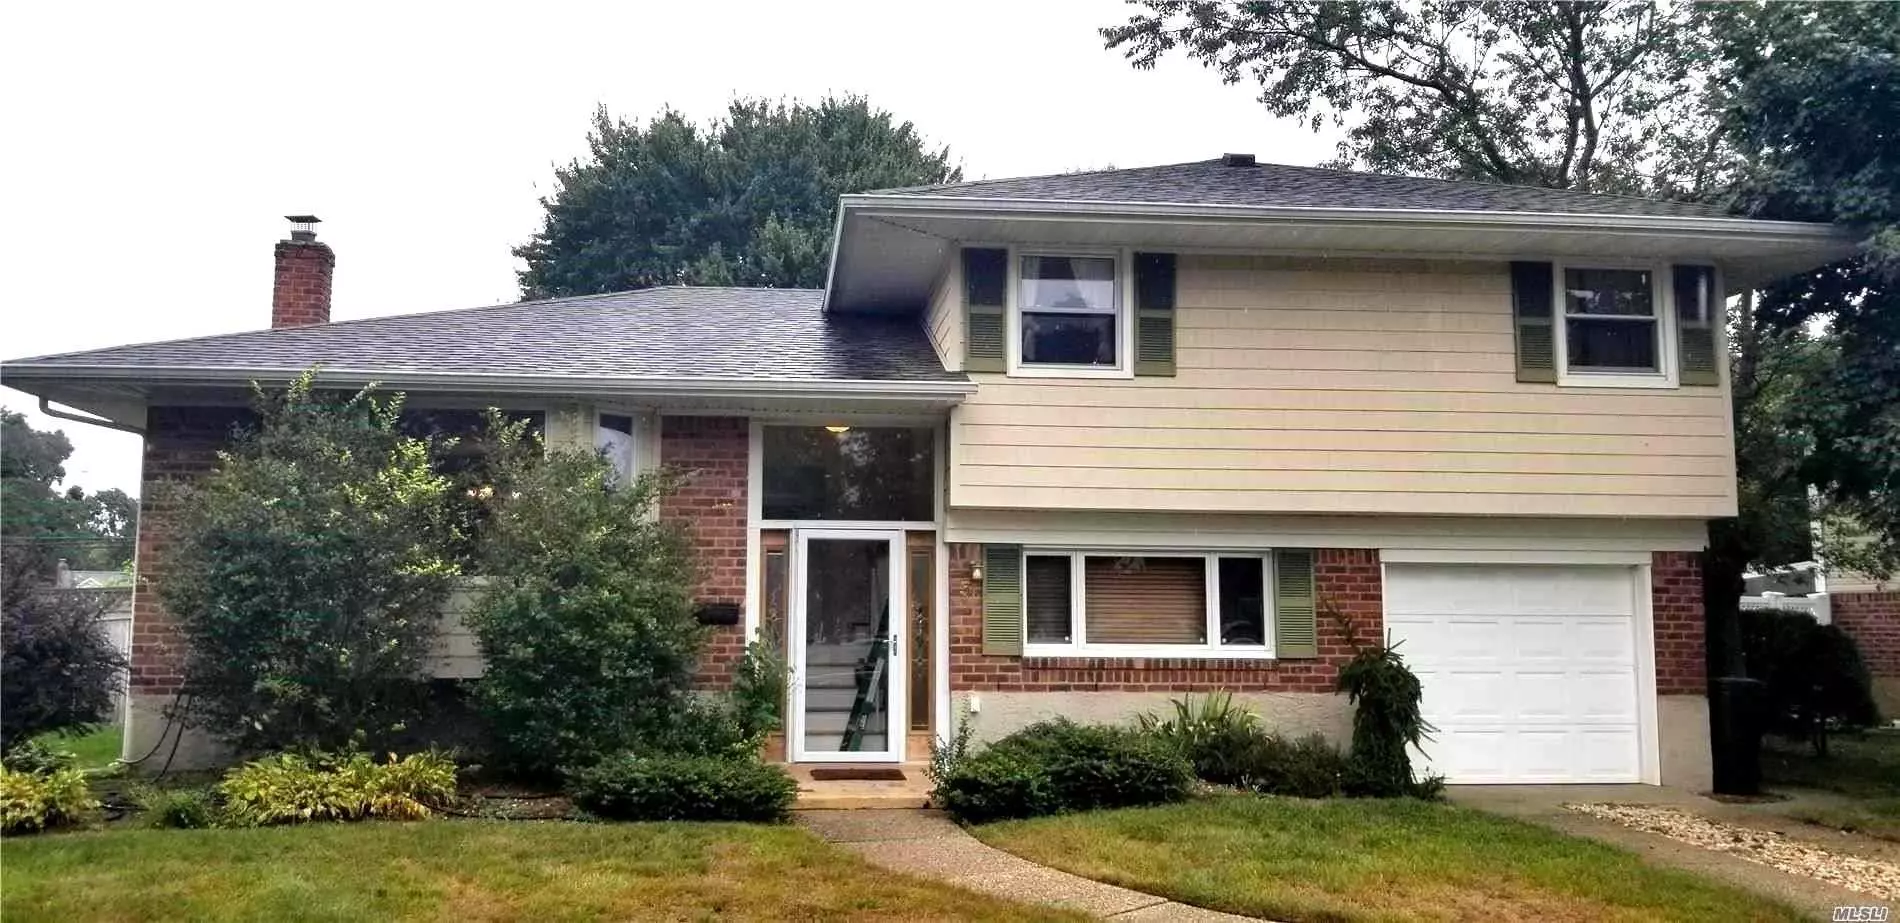 Freshly Painted 3 Bedroom 2 Bath Split, Updated Bathrooms, Hardwood Floors Throughout.Fenced In Back Yard In A Cul De Sac. Large Rooms, Formal Dining Room. Nice Size Eat In Kitchen